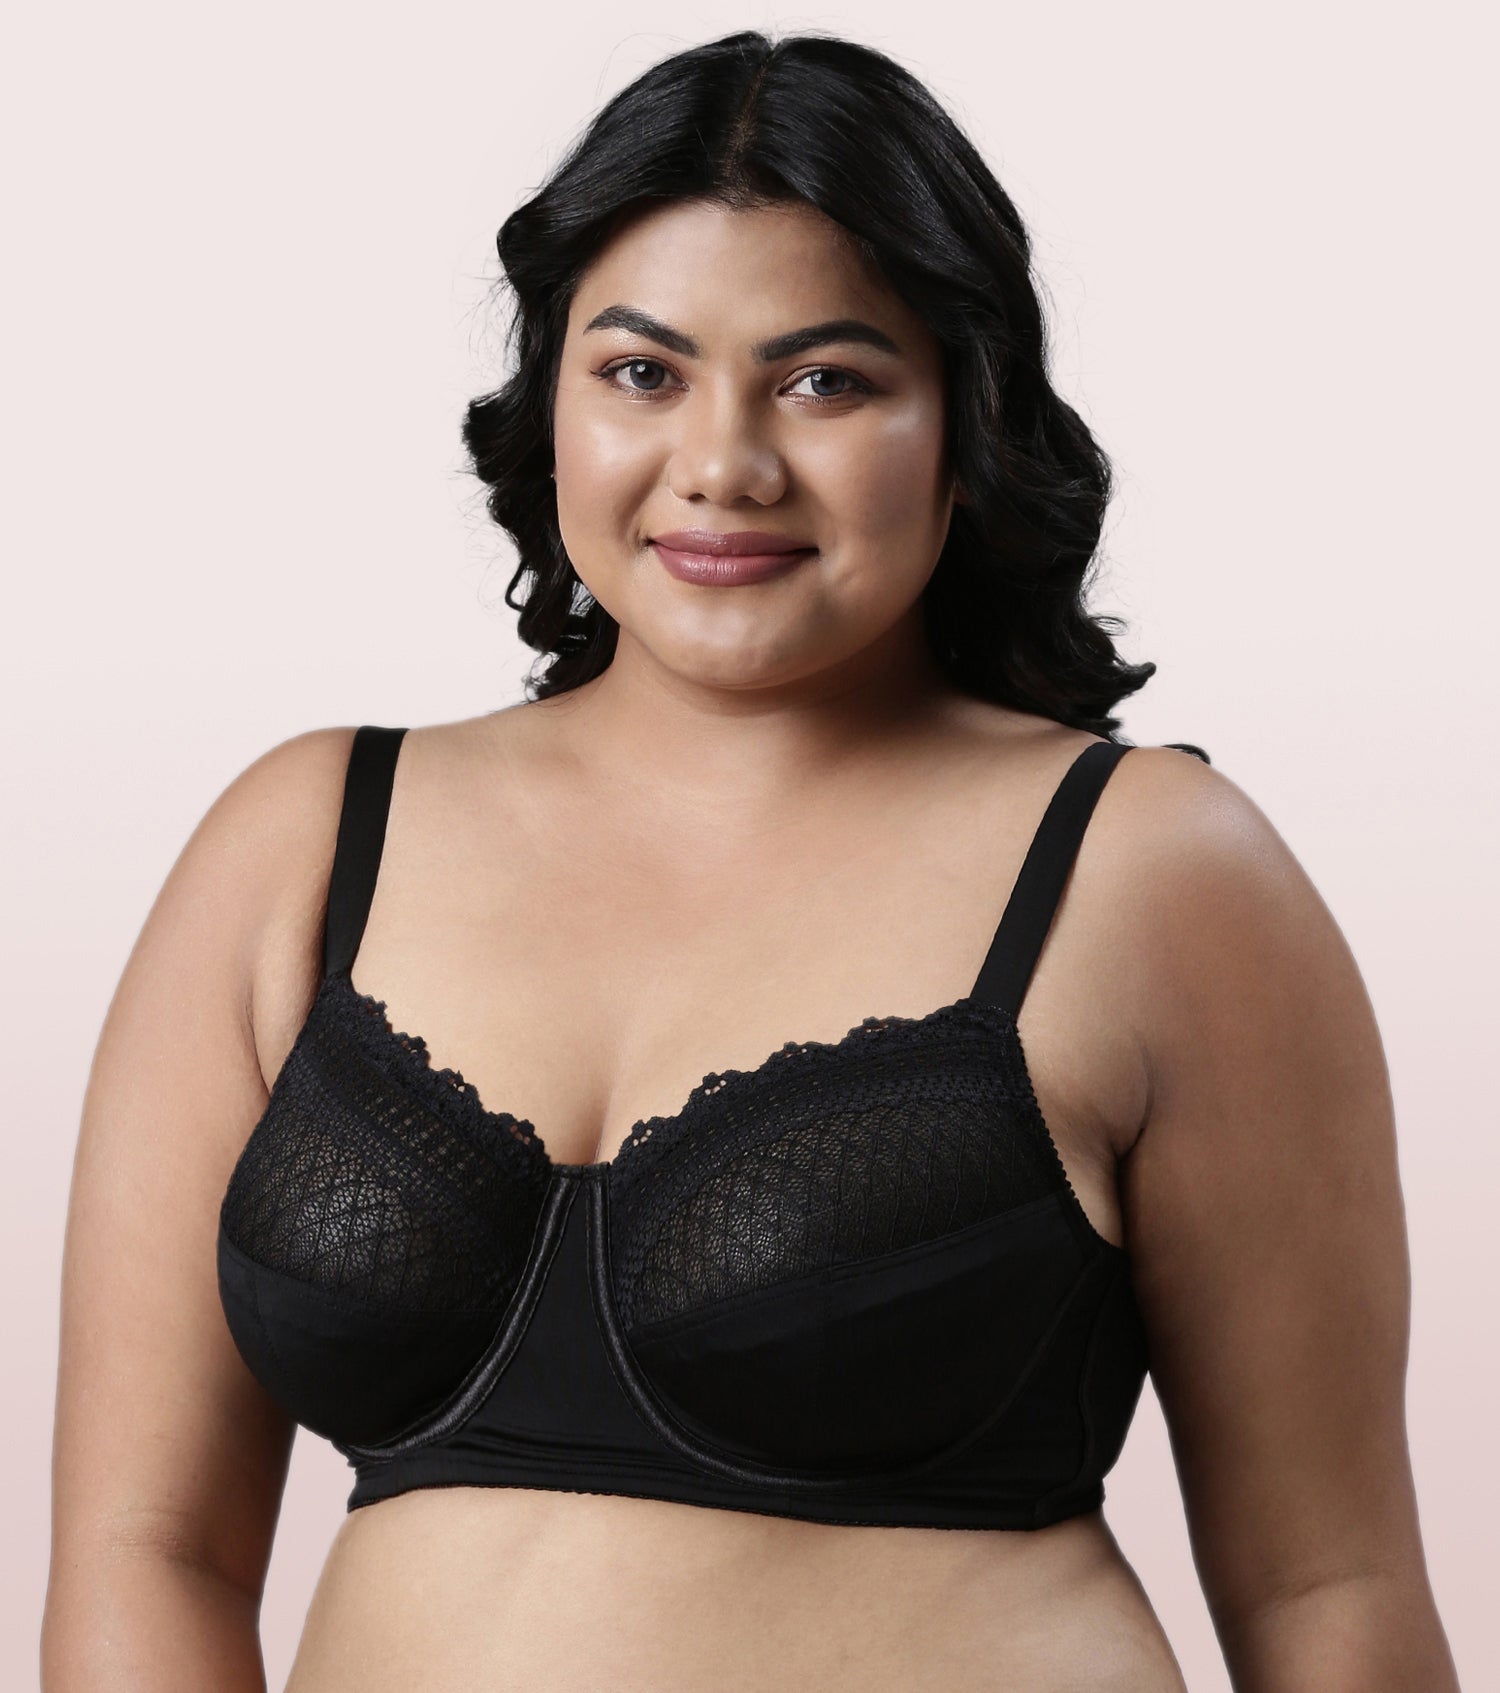 Simply Fashion Blossom Wired Push Up Bra in Black